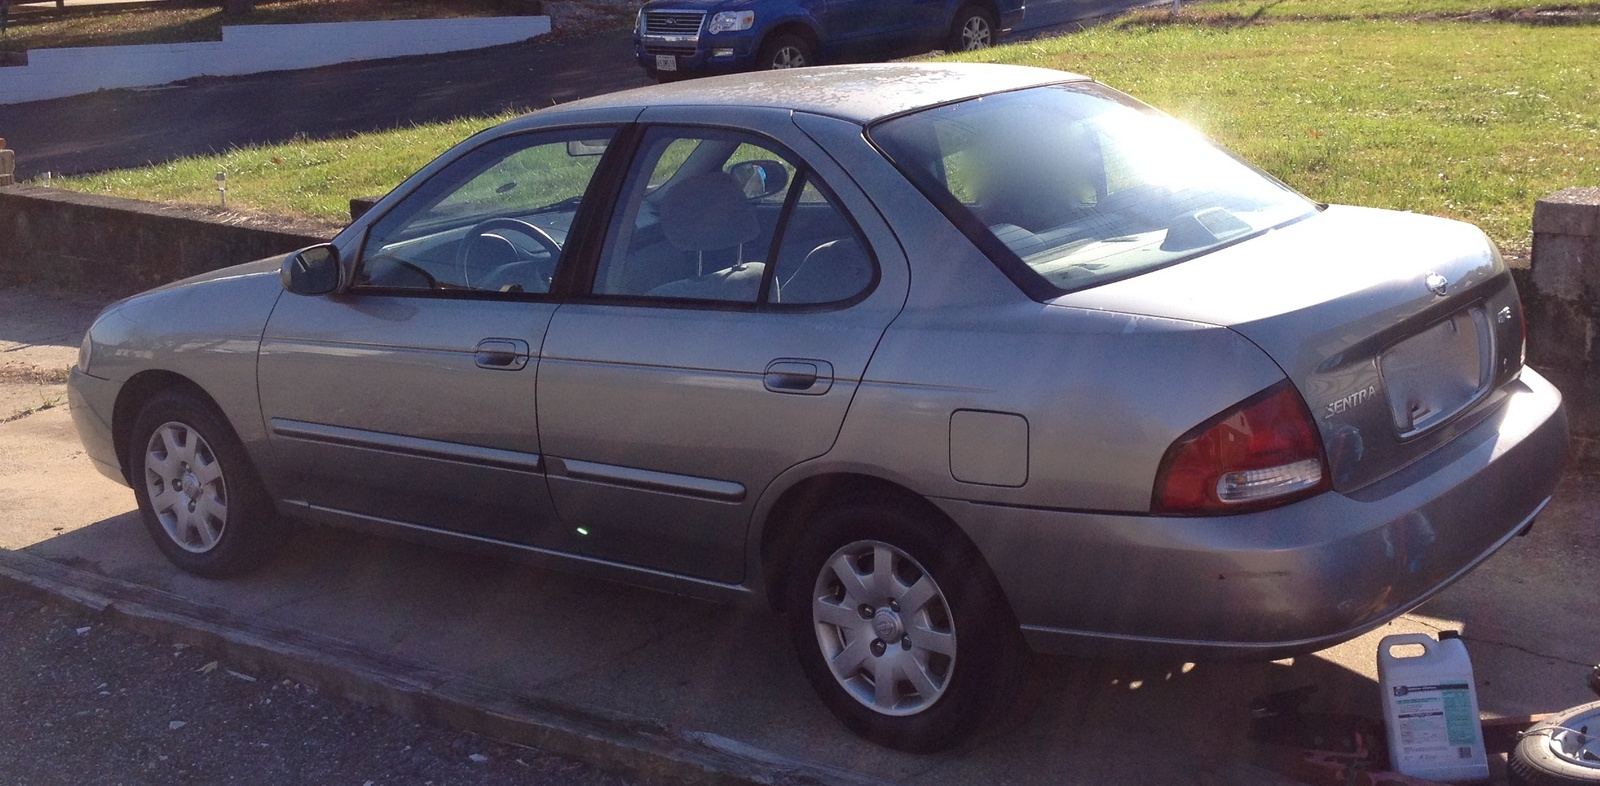 2001 Nissan sentra gxe specifications #2